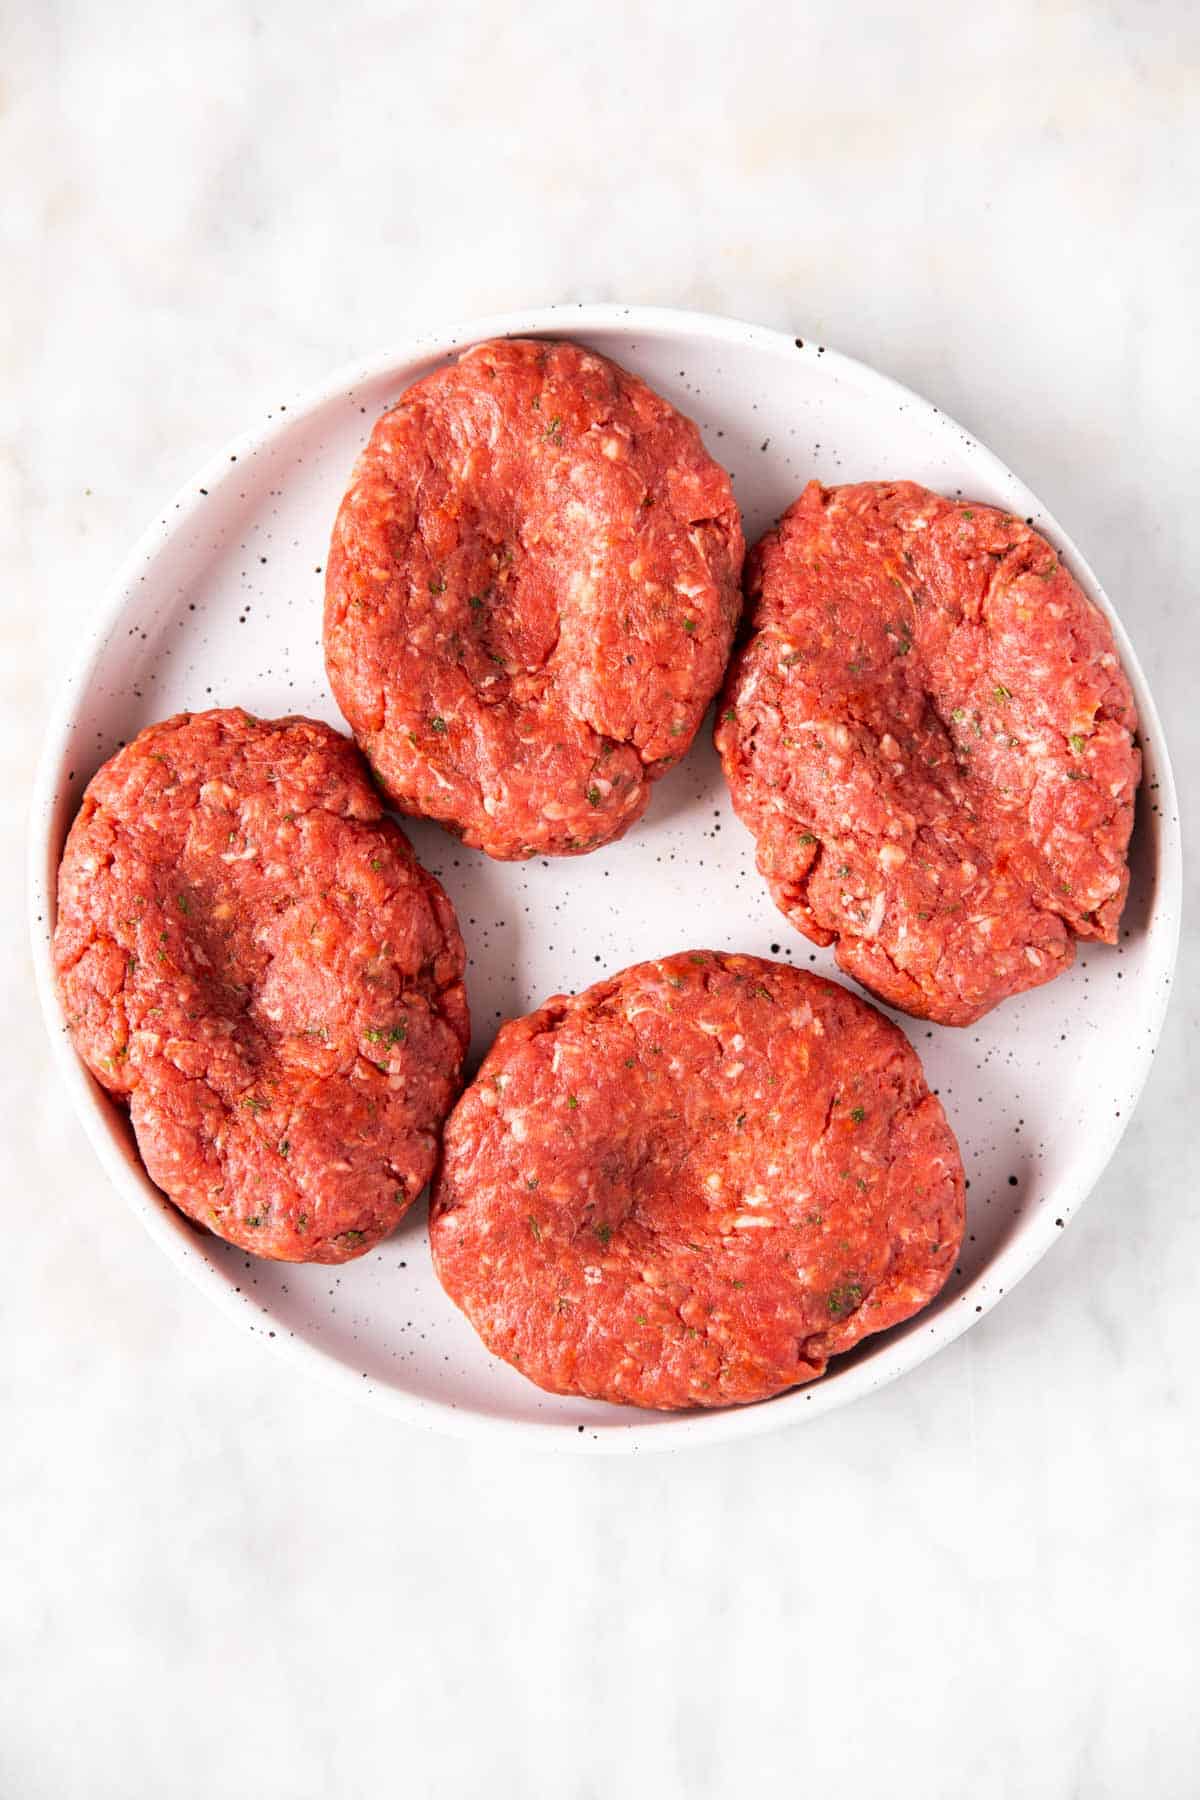 four shaped burger patties on white plate